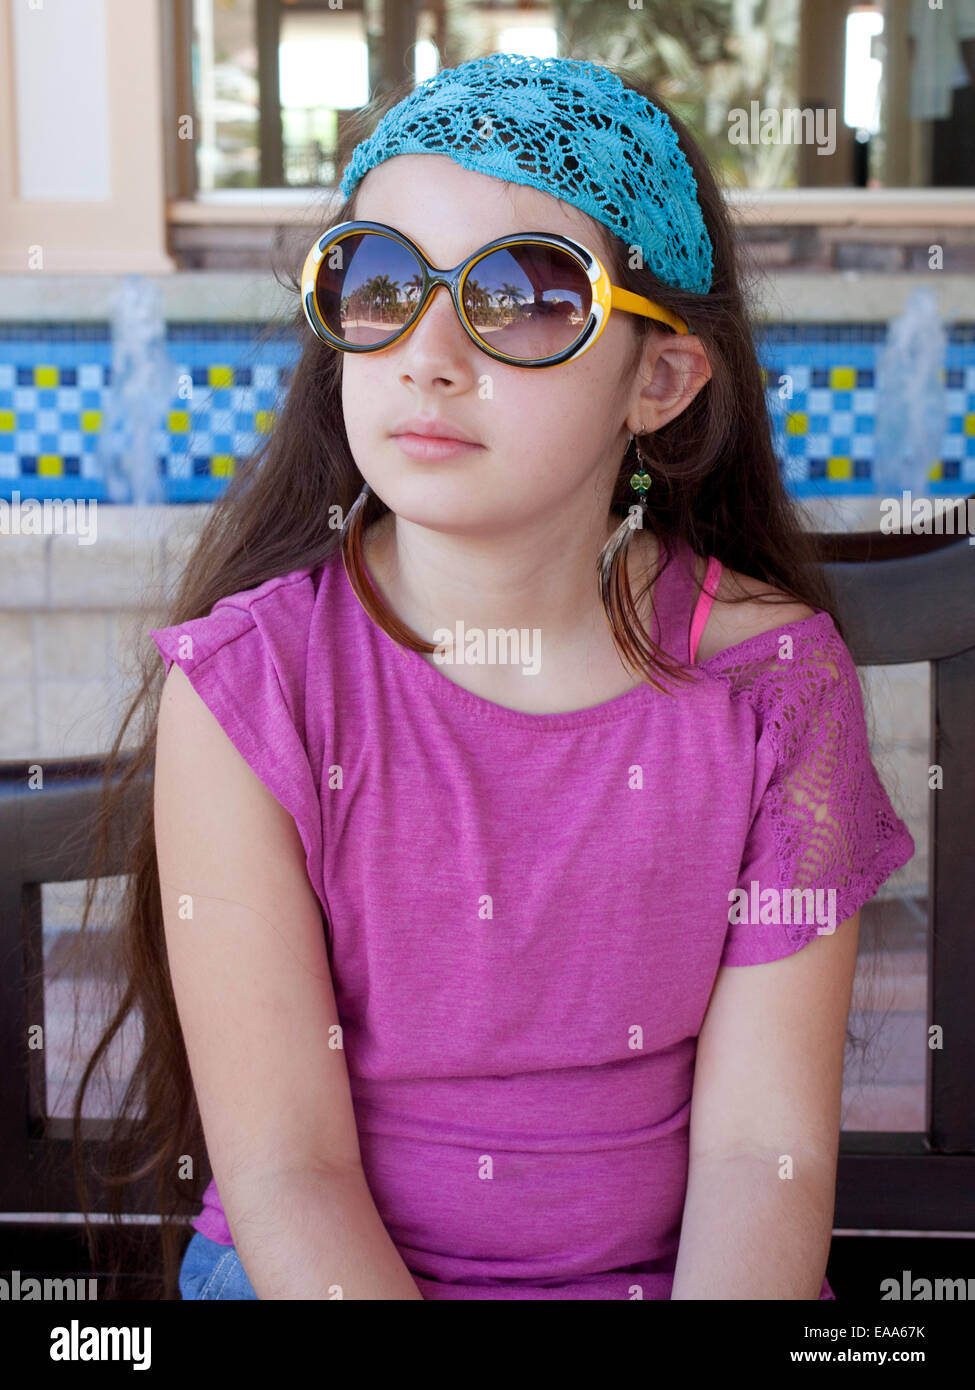 young girl with sunglasses, feather earrings and head scarf Stock Photo